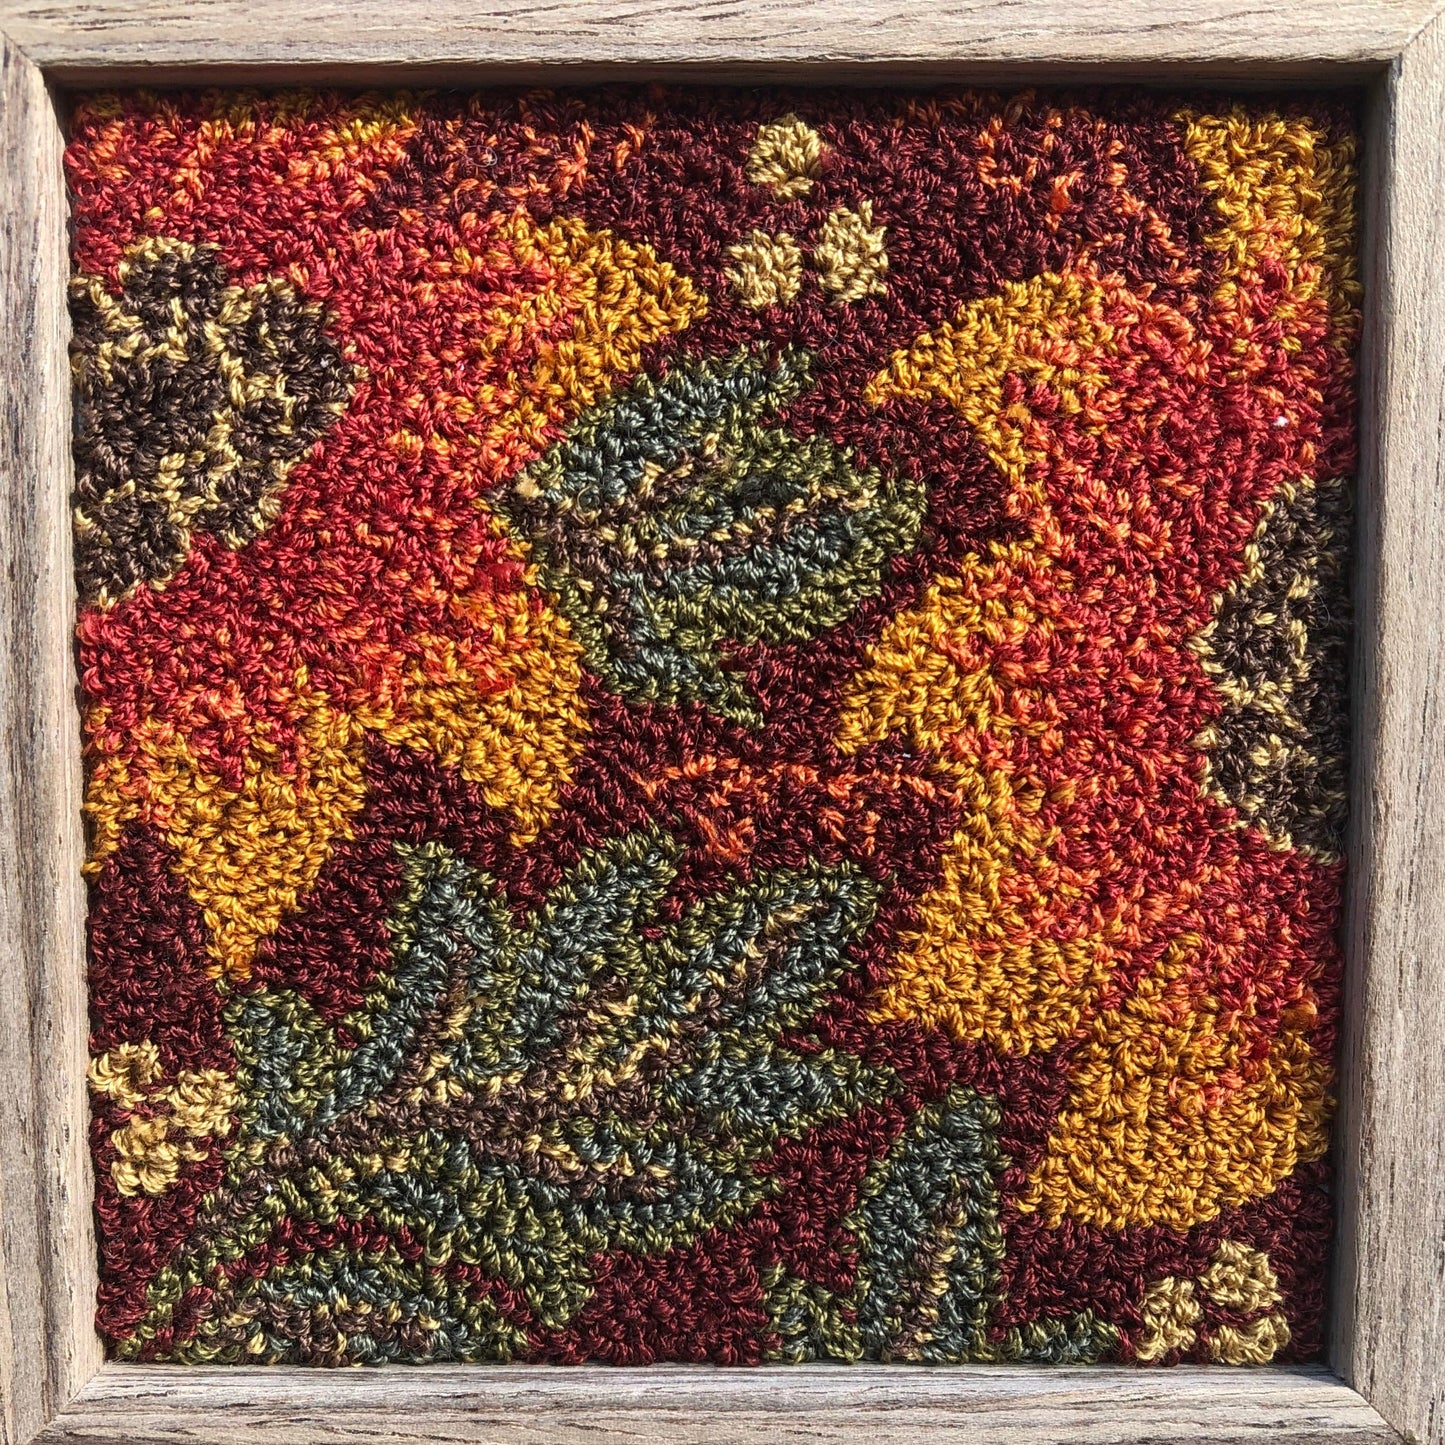 Autumn Glow- Set of 4 Punch Needle Patterns, By Orphaned Wool, Available as a Paper Pattern and Pattern on Weaver's Cloth